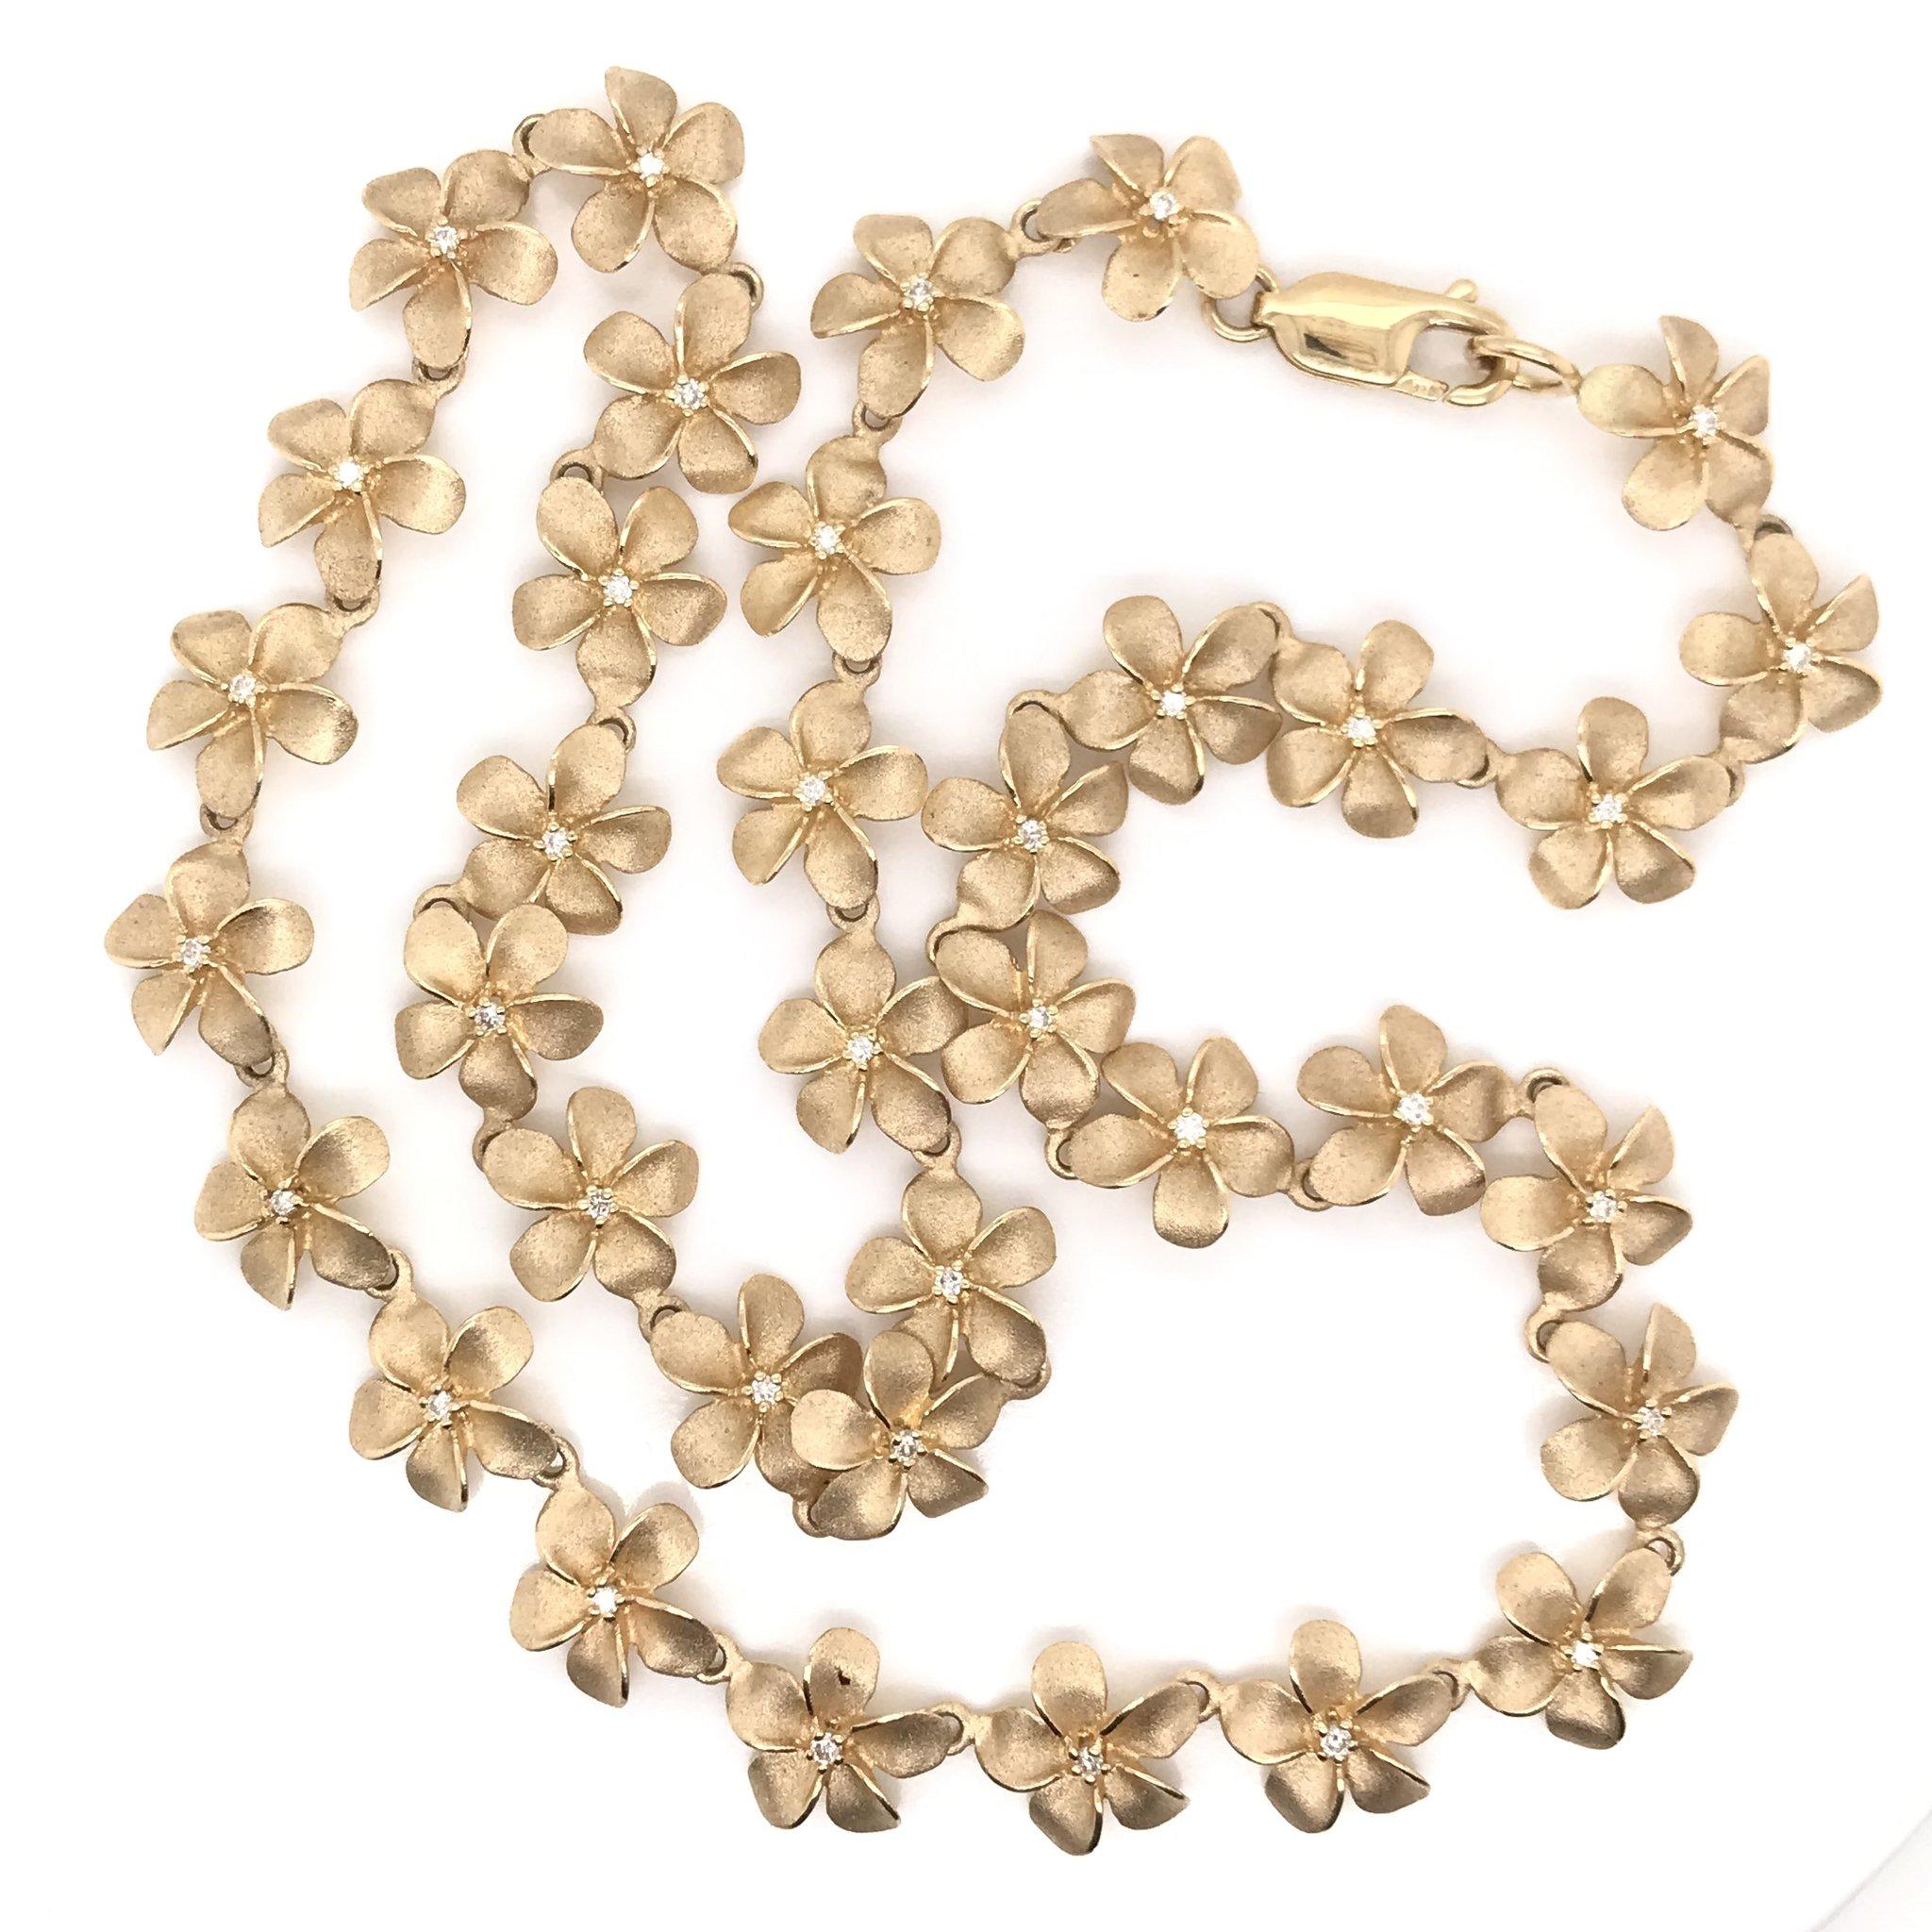 This is an estate piece. This charming necklace is made from 36 14k yellow gold sculpted flower links, each featuring a tiny sparkling accent diamond in the center. The necklace's total combined diamond weight measures approximately 0.50 carats.